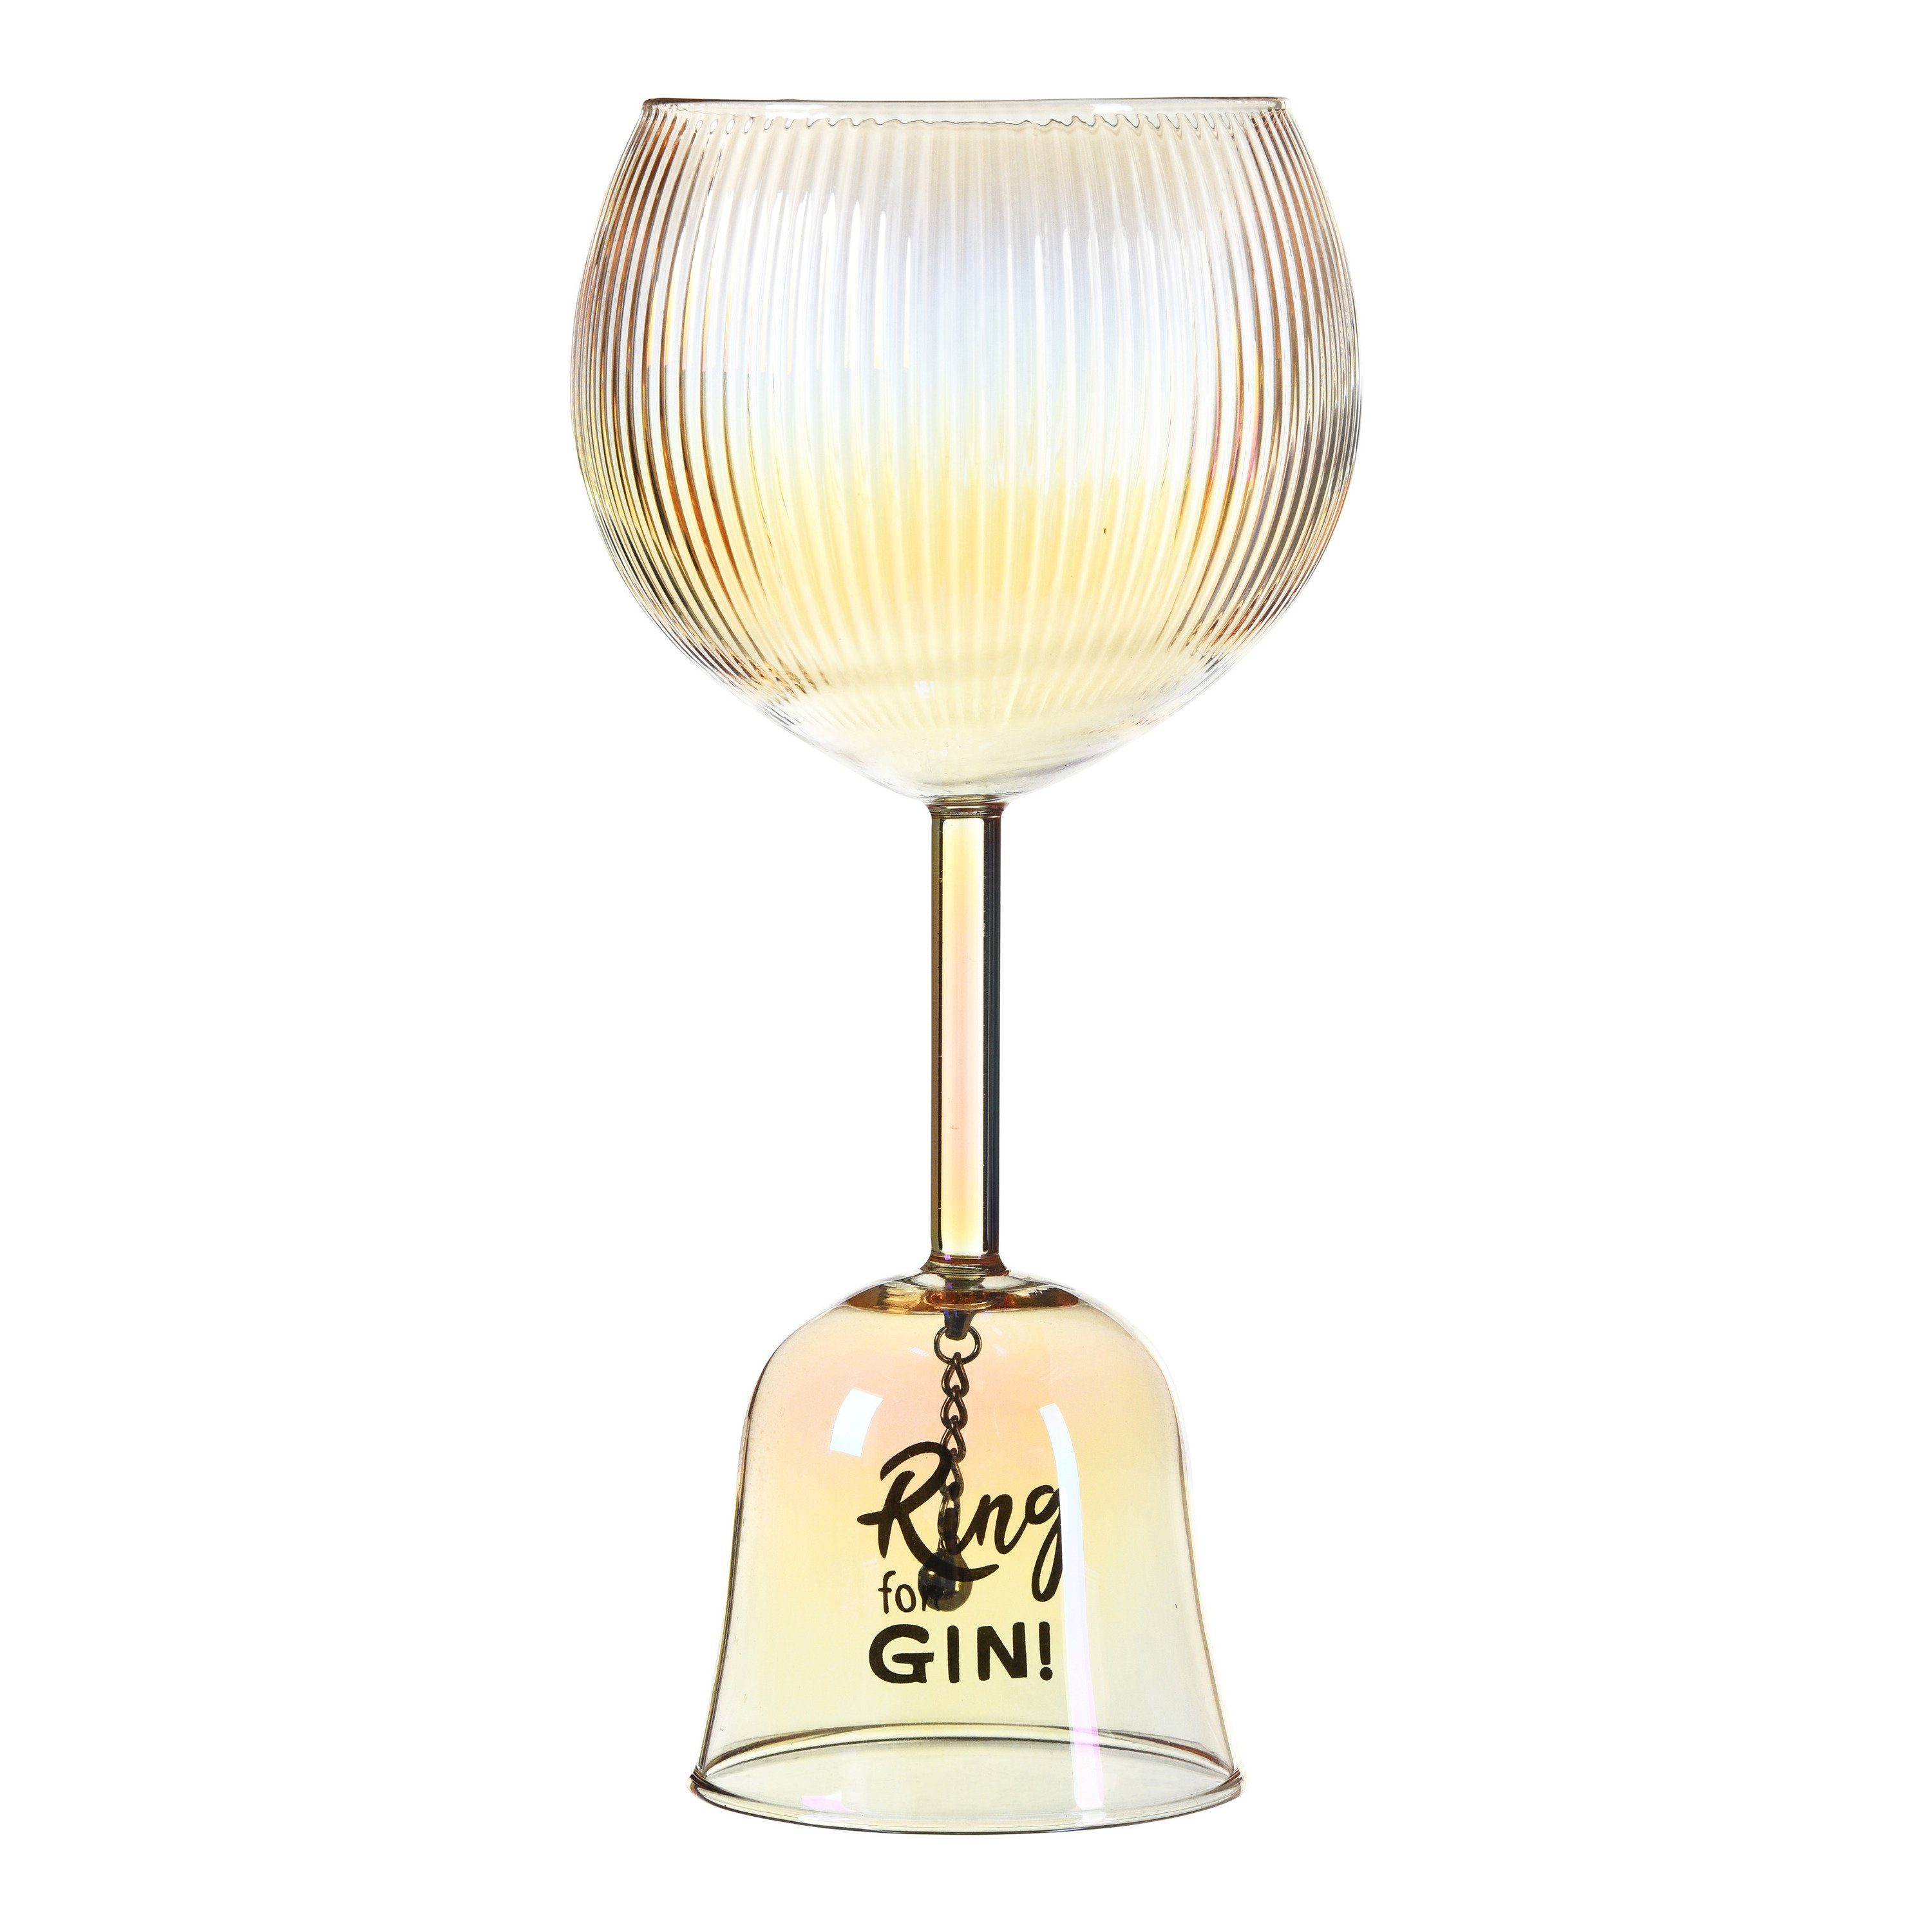 Ring Gin, 2% 98% Glas, for Metall Glas Depot Trinkglas